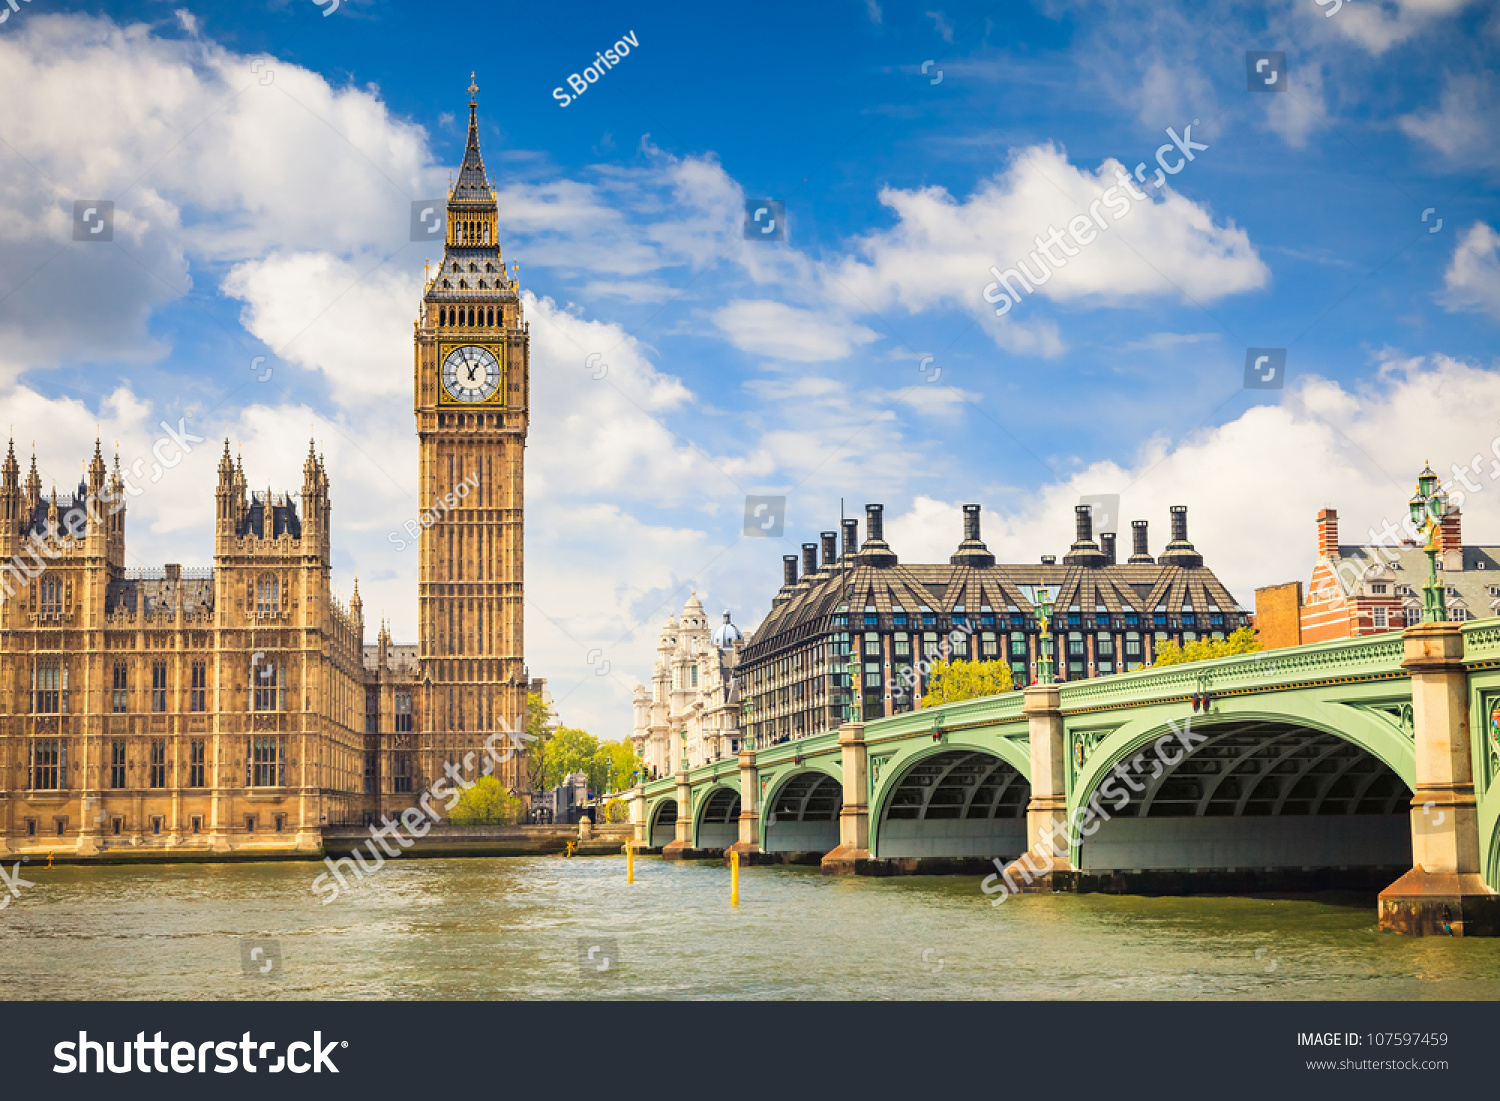 Big Ben and Houses of Parliament, London, UK #107597459